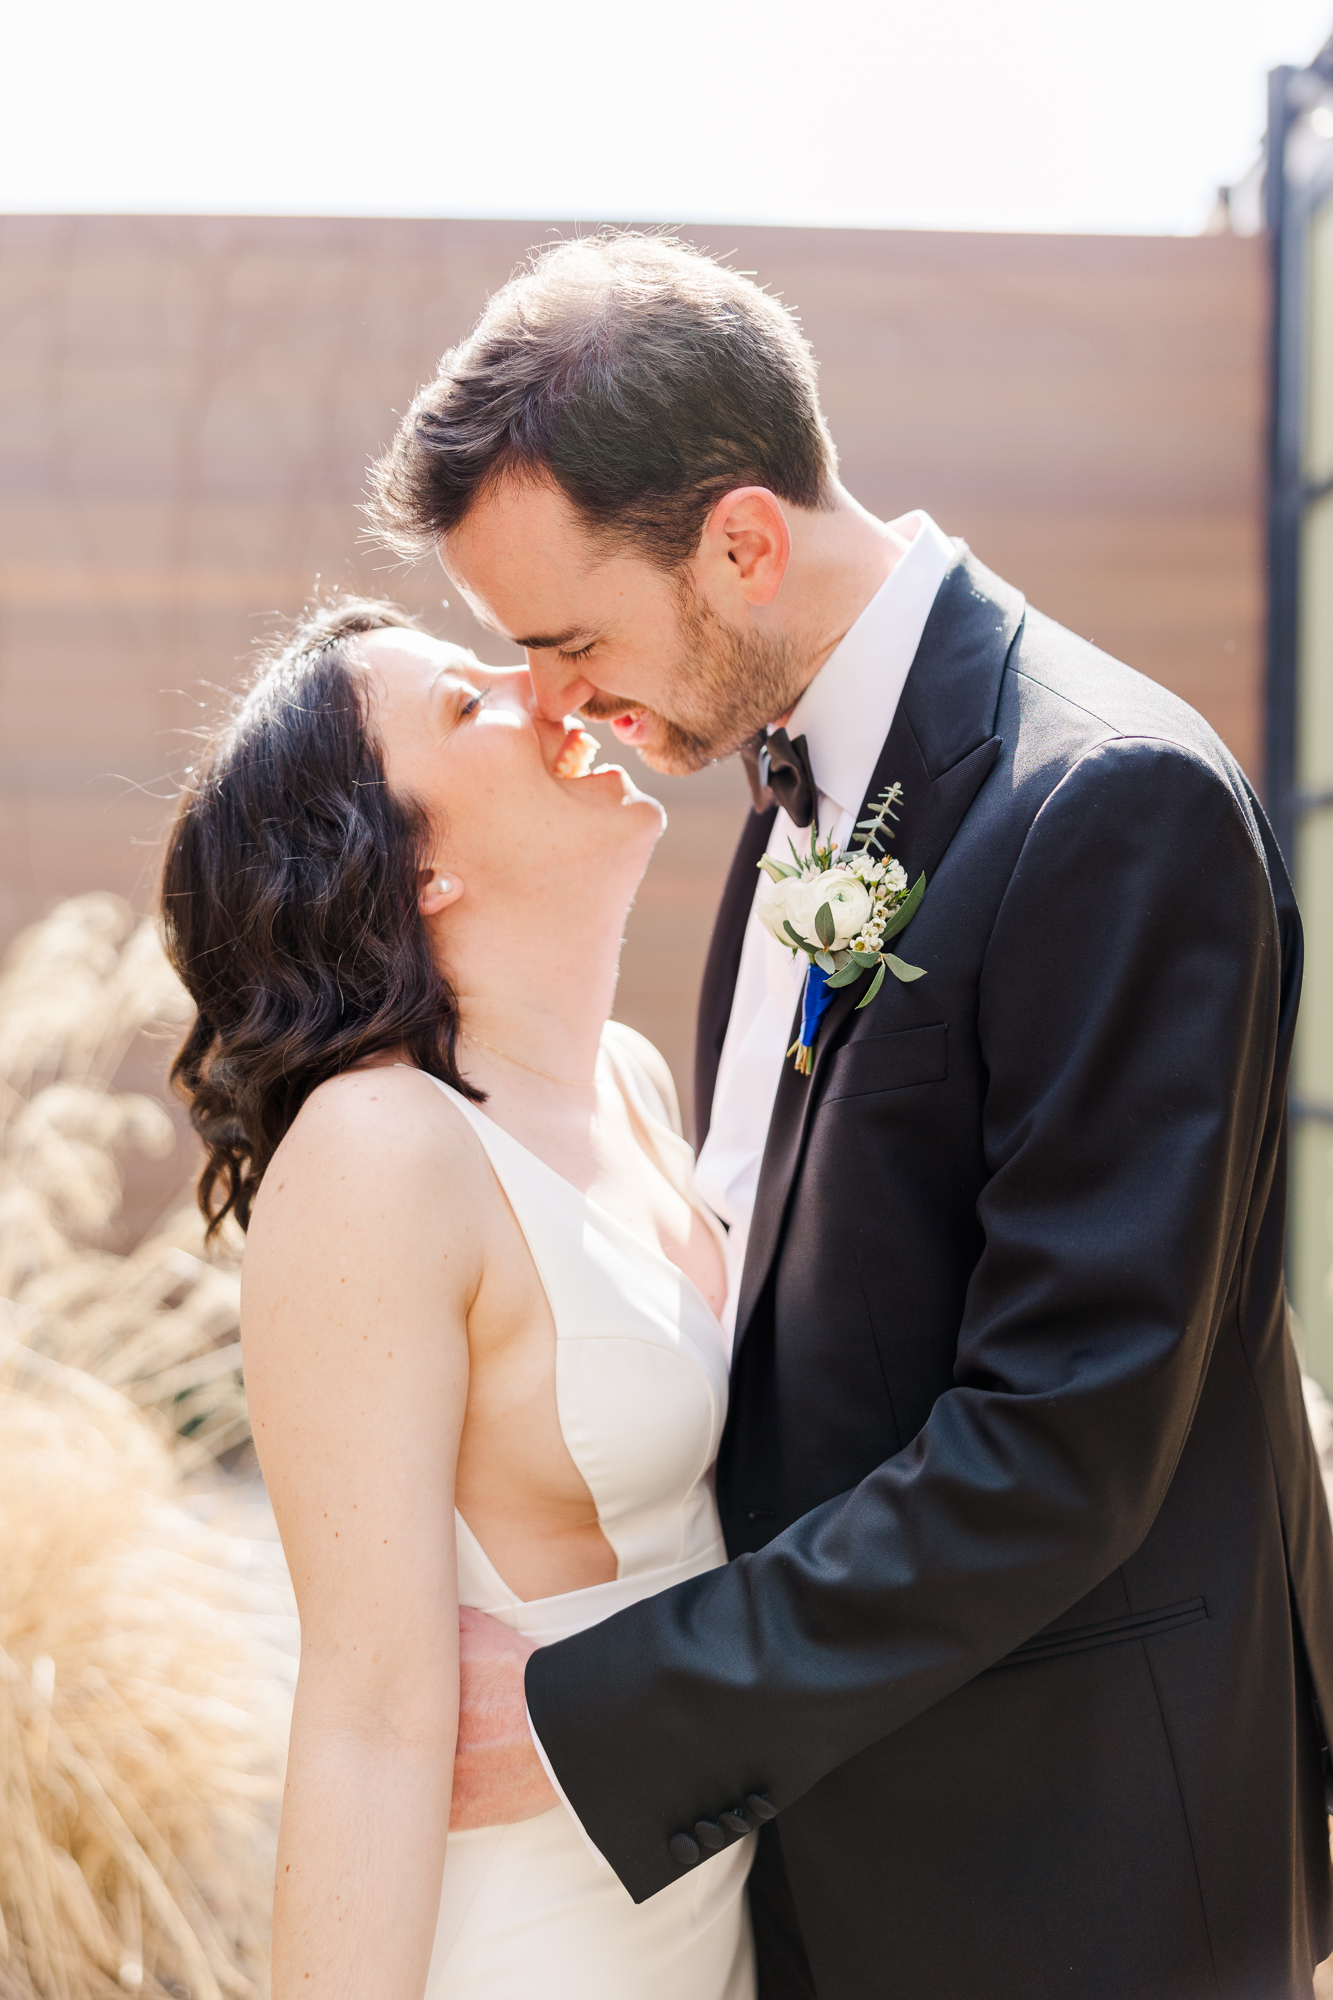 Glowing Spring Wedding Photos at The Green Building in Brooklyn NY